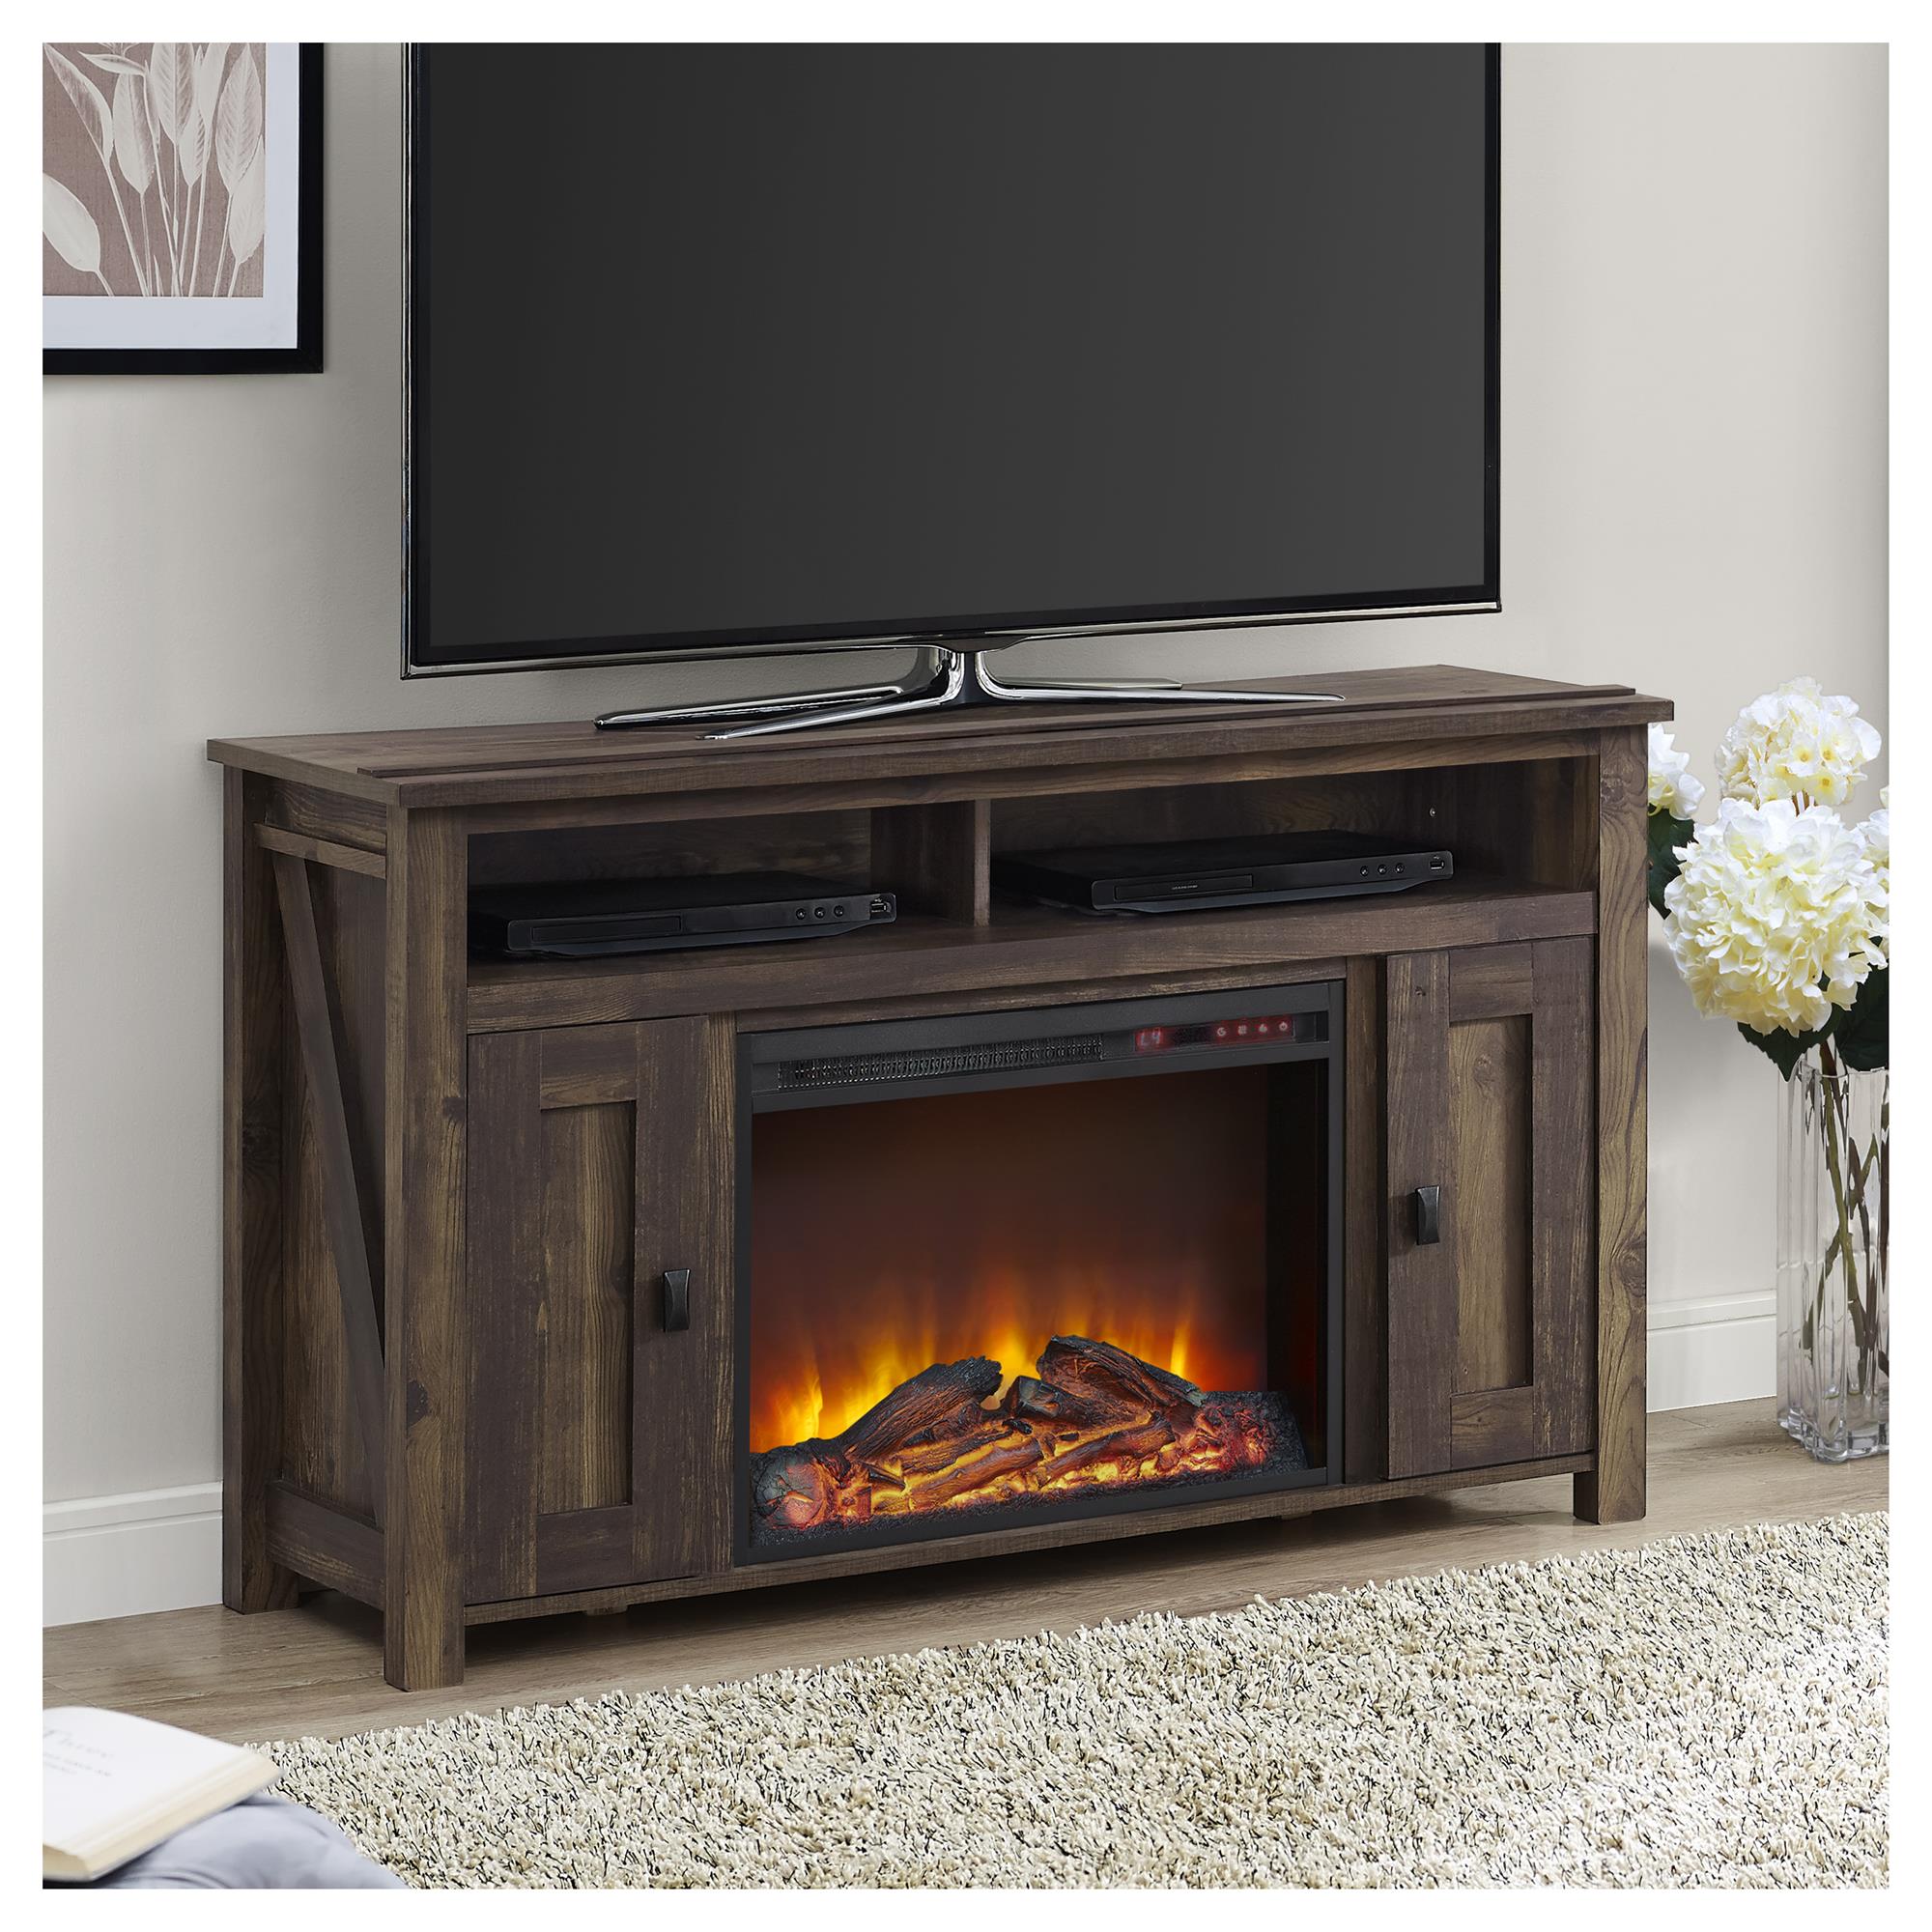 Sauder Tv Stand with Fireplace Unique Farmington Electric Fireplace Tv Console for Tvs Up to 50